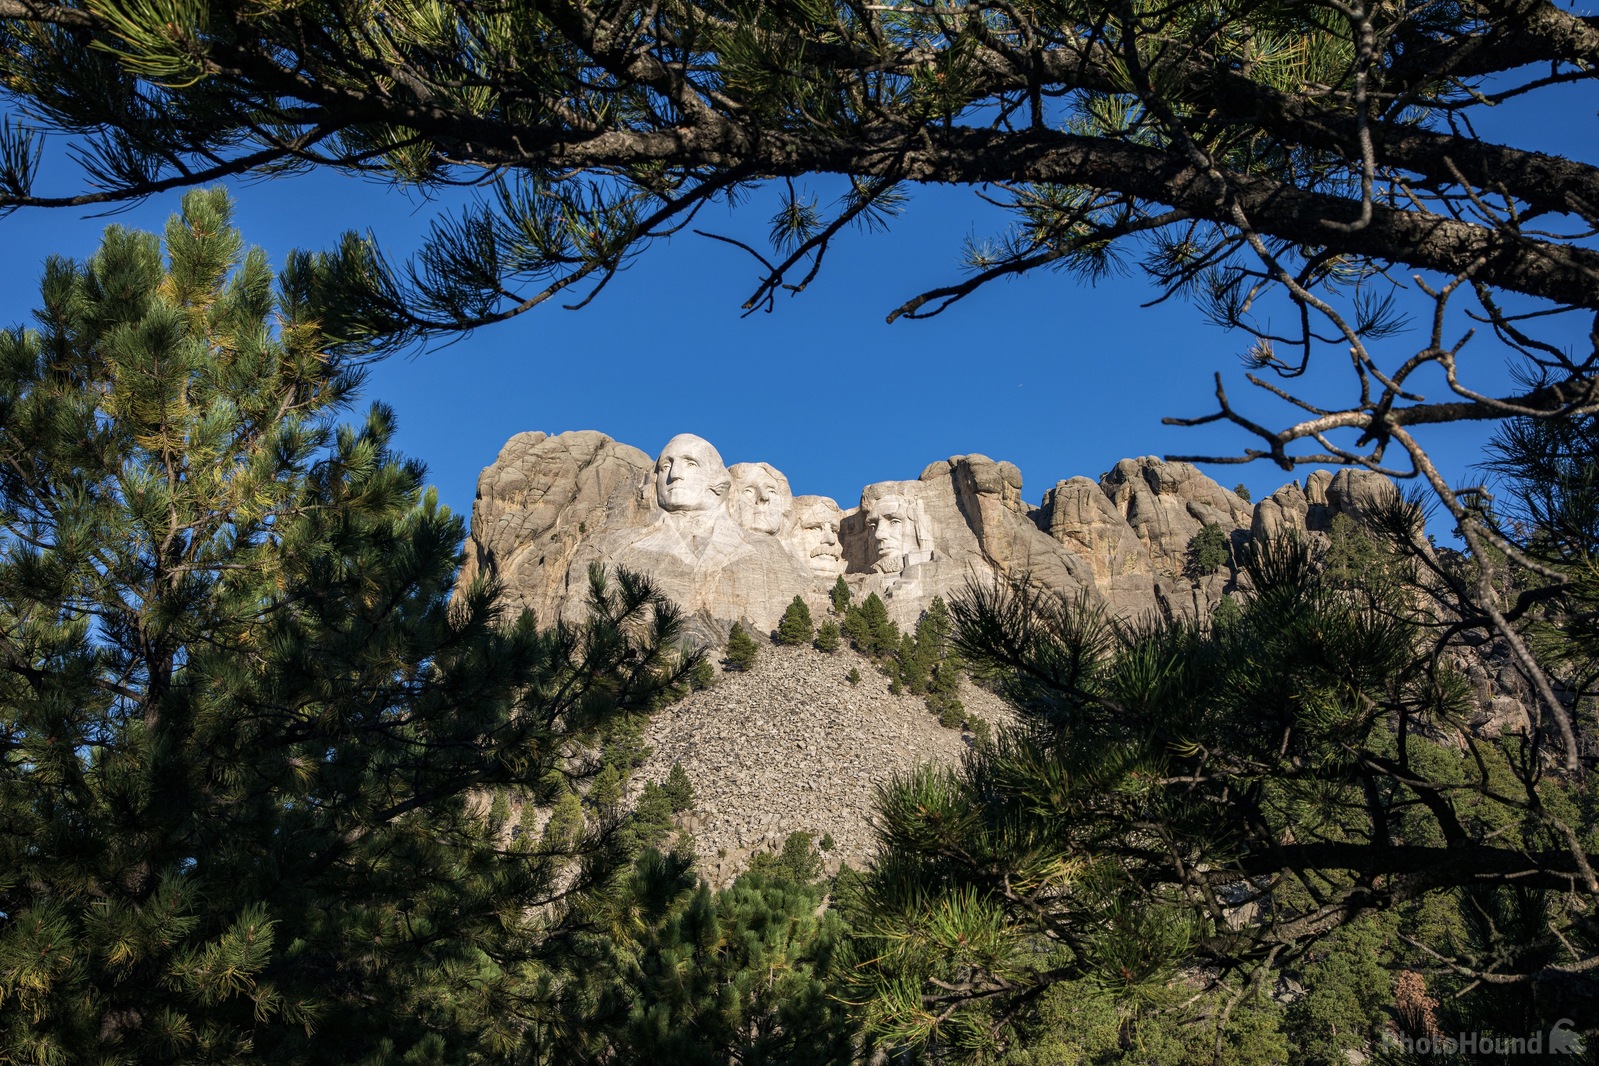 Image of Mount Rushmore National Memorial by Gary Leverett